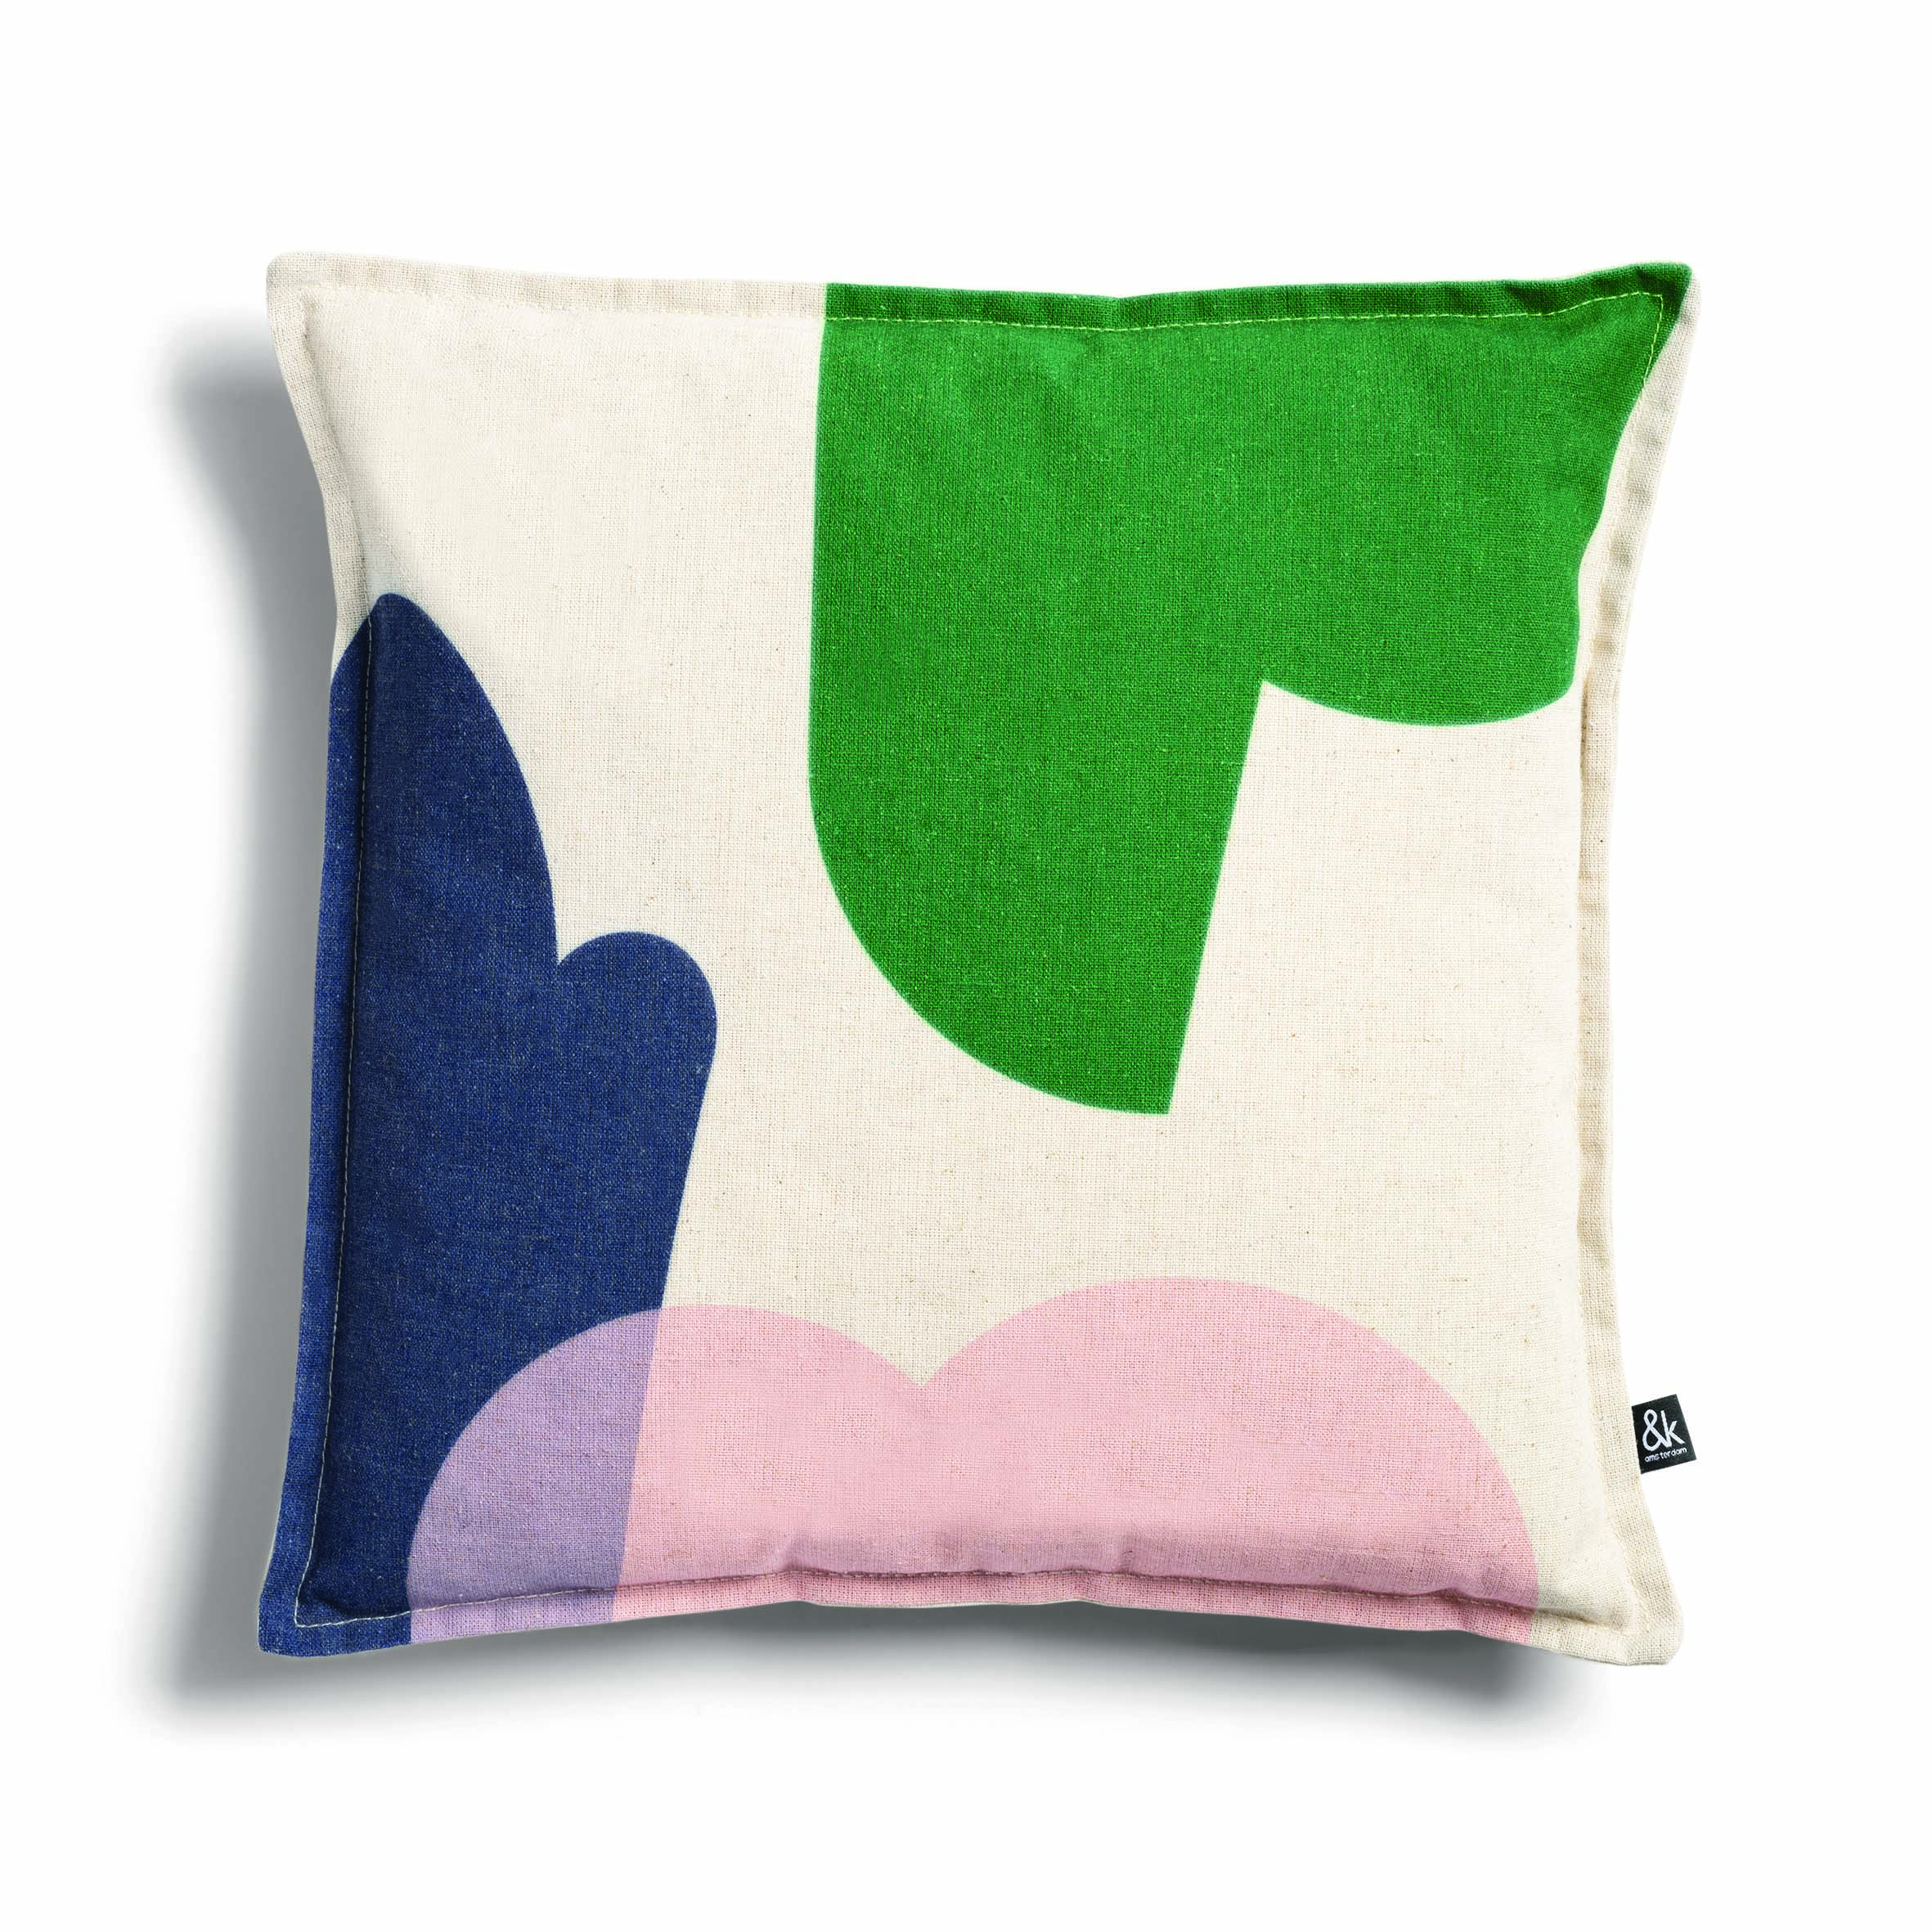 andklevering-cushion-collage-square-green-1